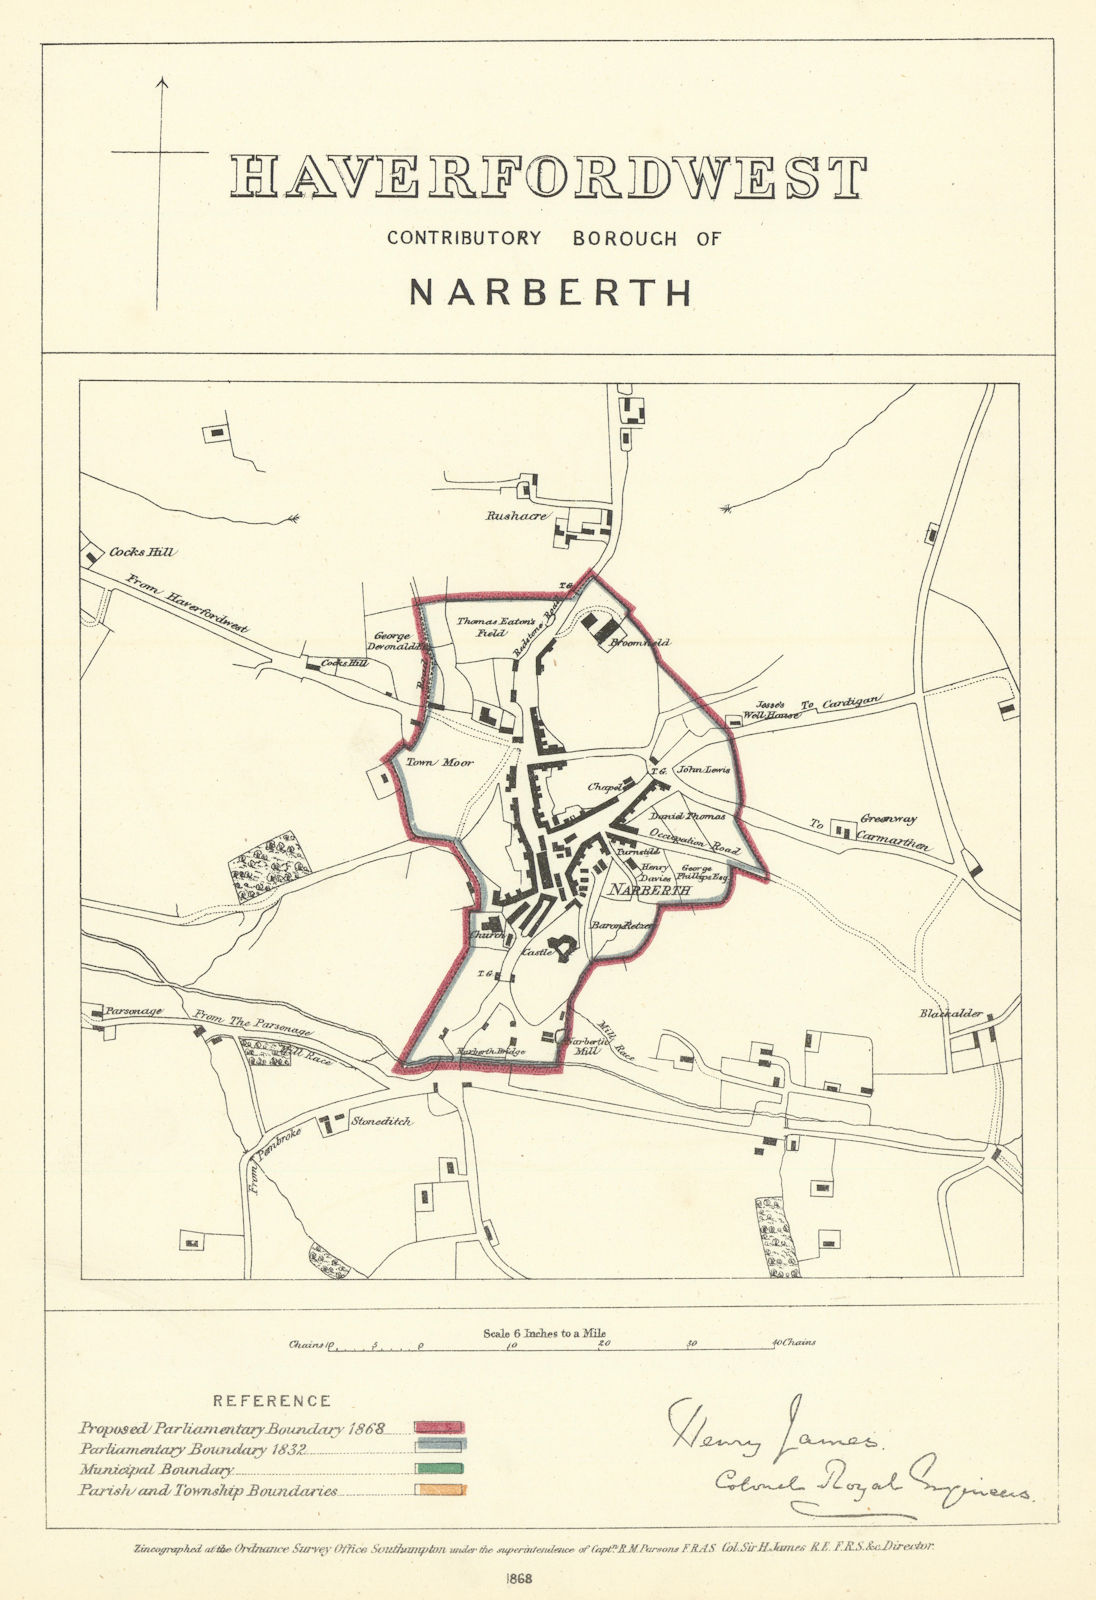 Haverfordwest Contrib'y Borough of Narberth. JAMES. Boundary Commission 1868 map